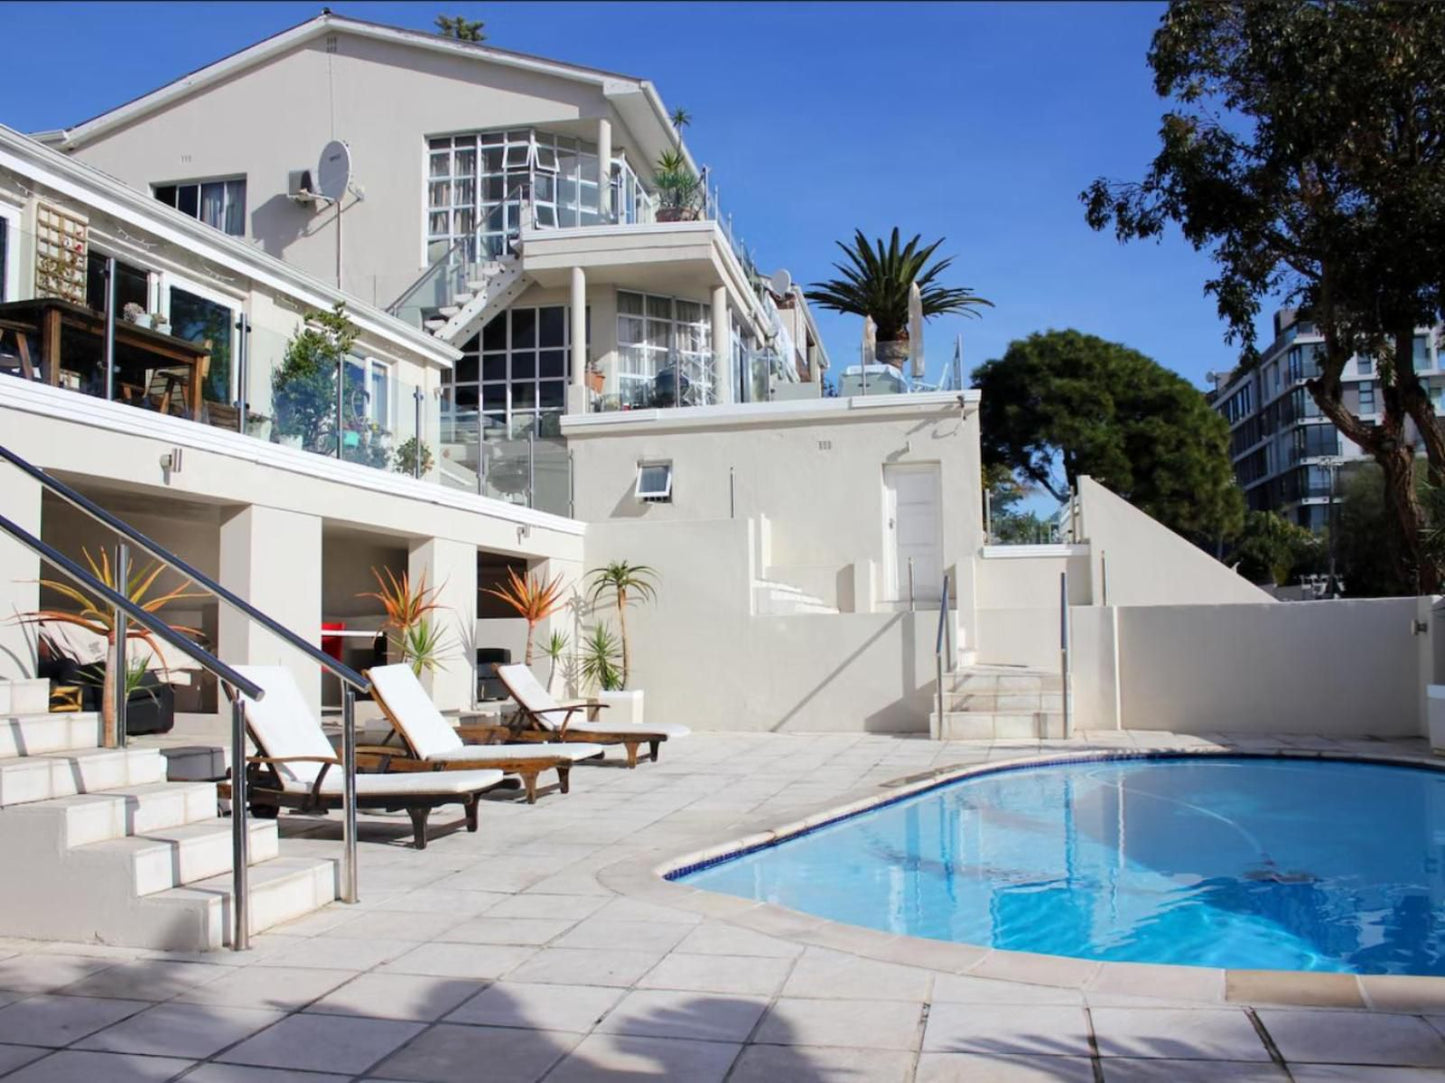 Grande Kloof Boutique Hotel Fresnaye Cape Town Western Cape South Africa House, Building, Architecture, Palm Tree, Plant, Nature, Wood, Swimming Pool